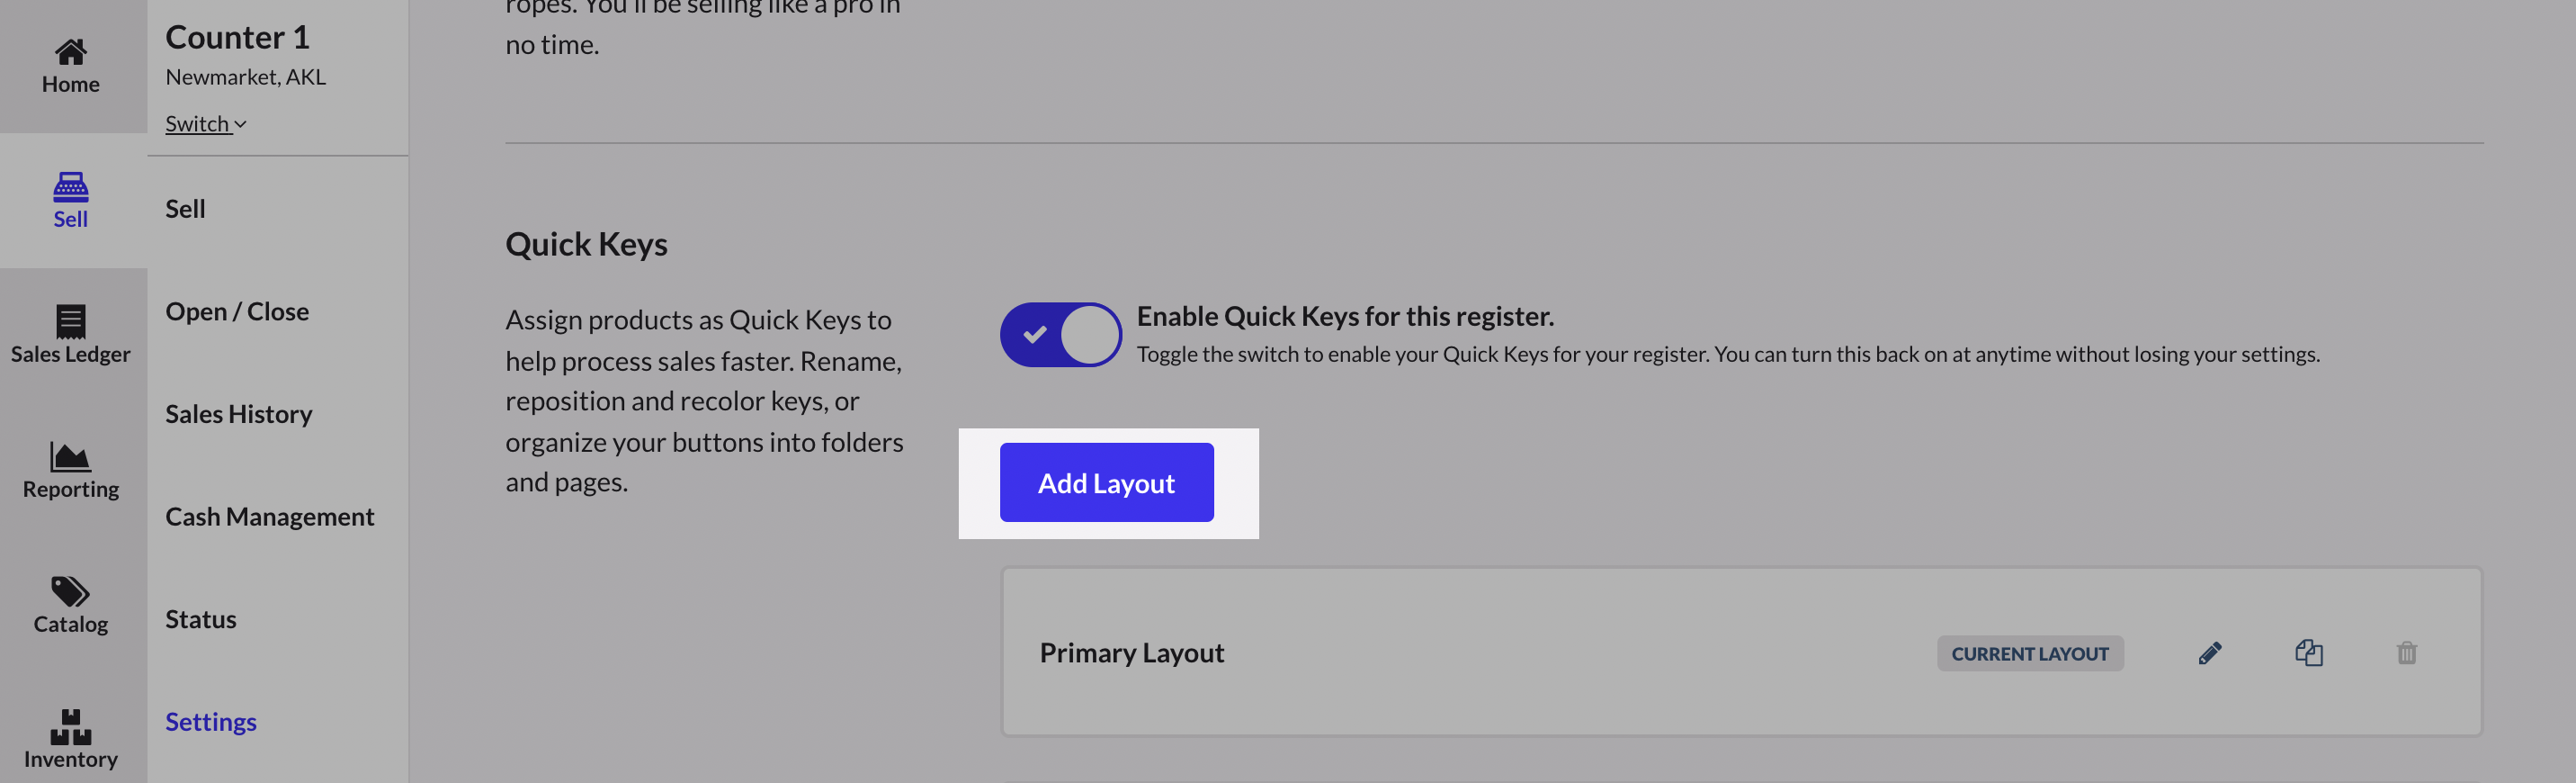 Quick-Keys-Add-Layout.png